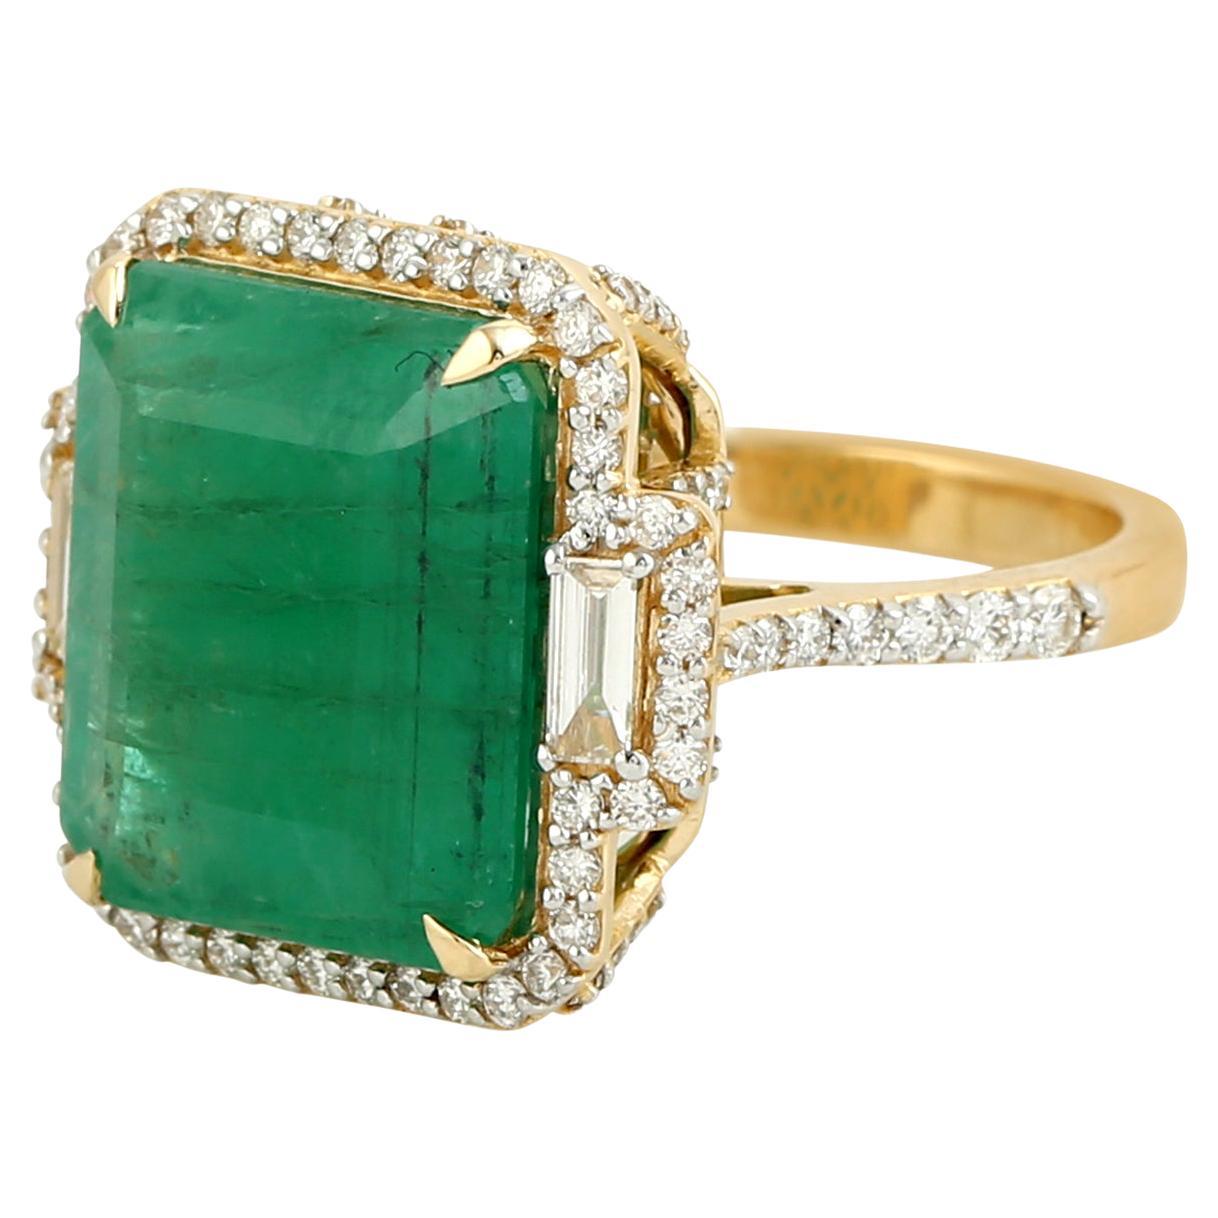 Cushion Shaped Zambian Emerald Cocktail Ring With Diamonds For Sale